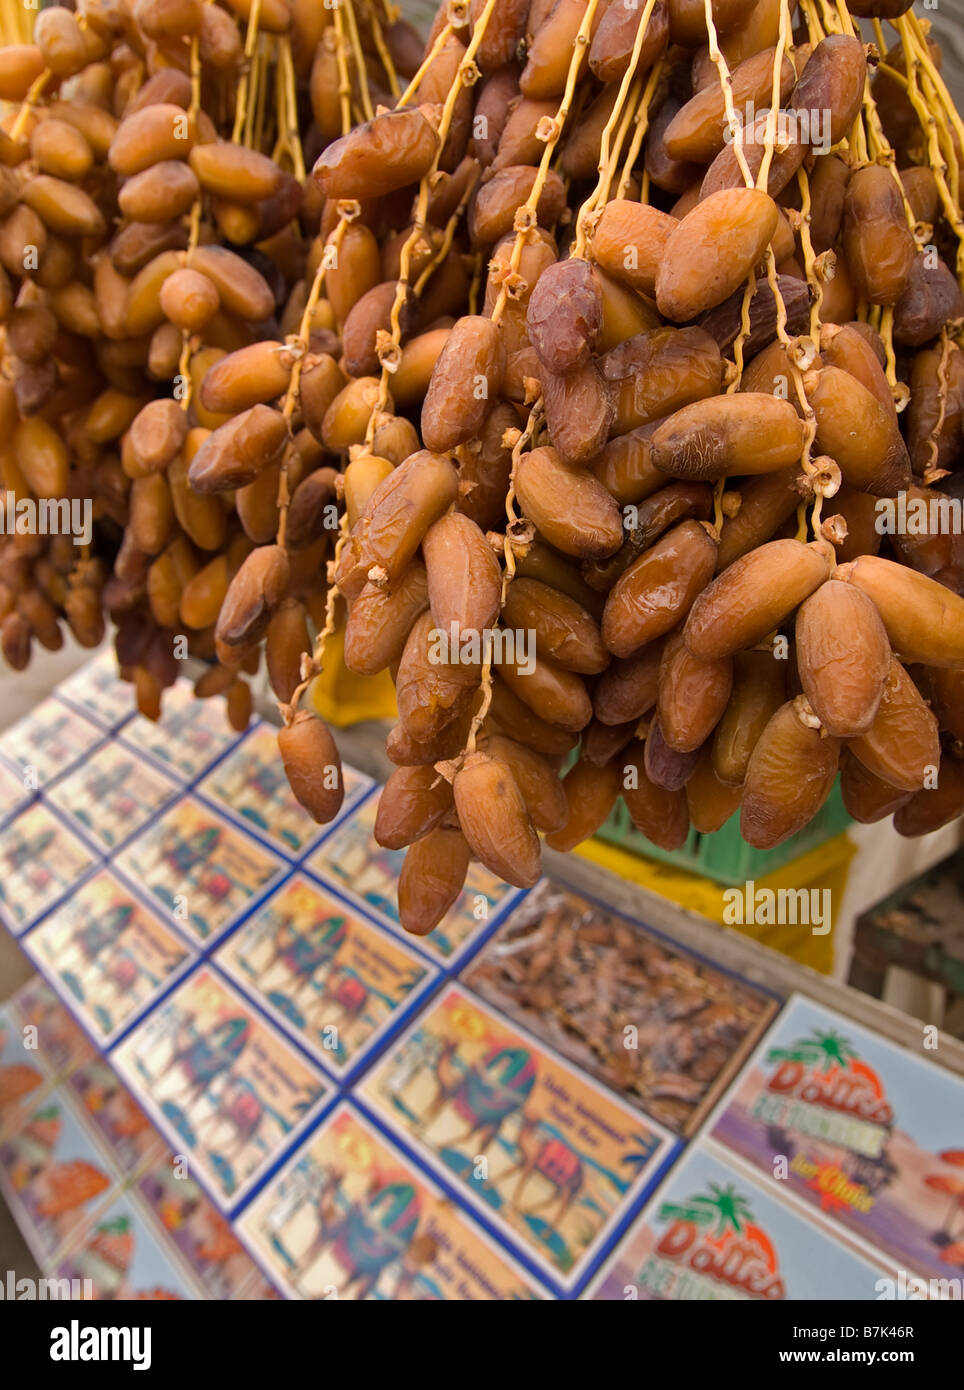 bunches of Tunisian dates for sale hang above boxed dates with colourful  labels Stock Photo - Alamy